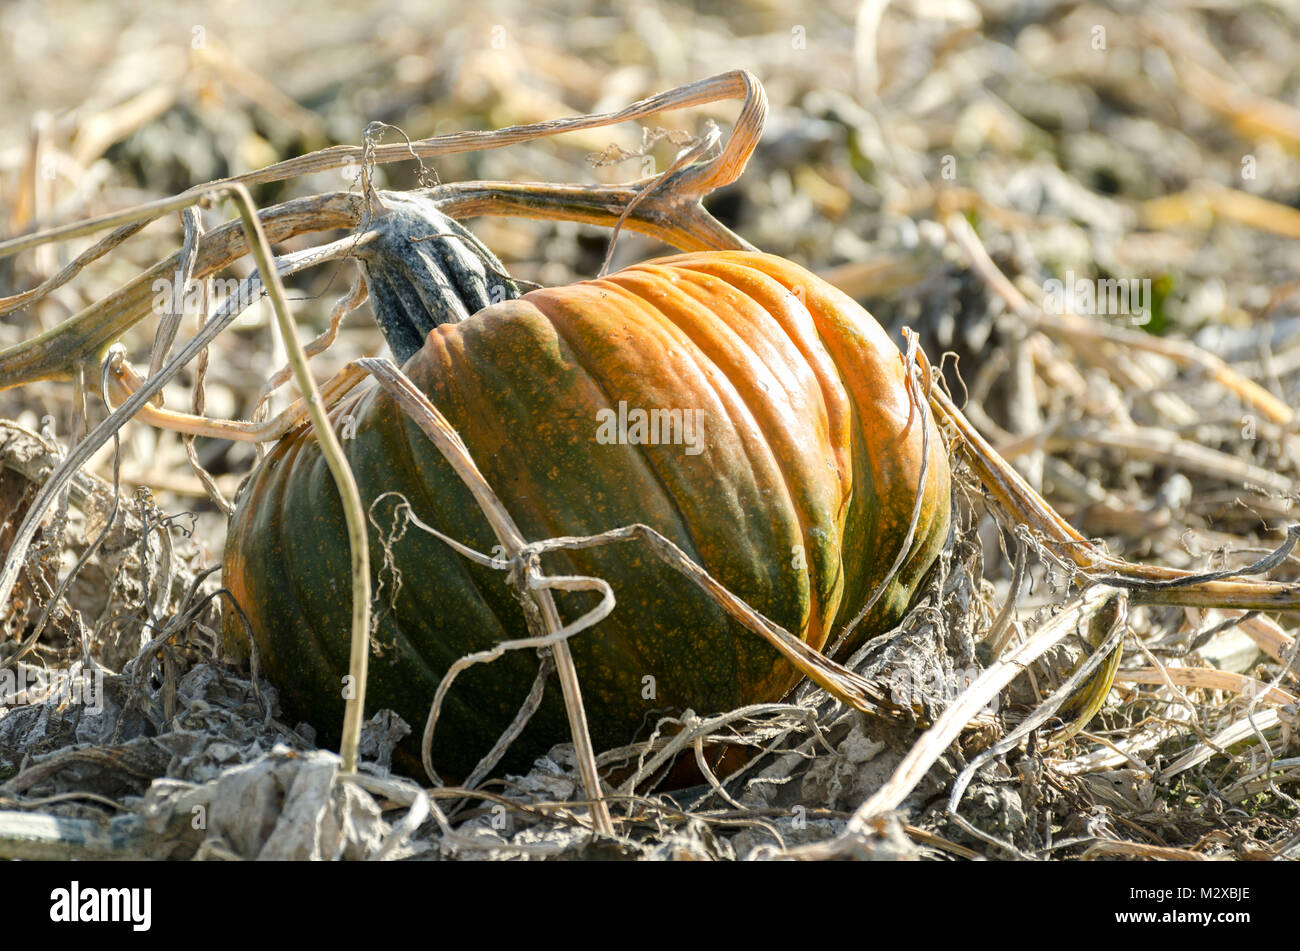 Pumpkin ripe and ready for harvest sit in open field Stock Photo